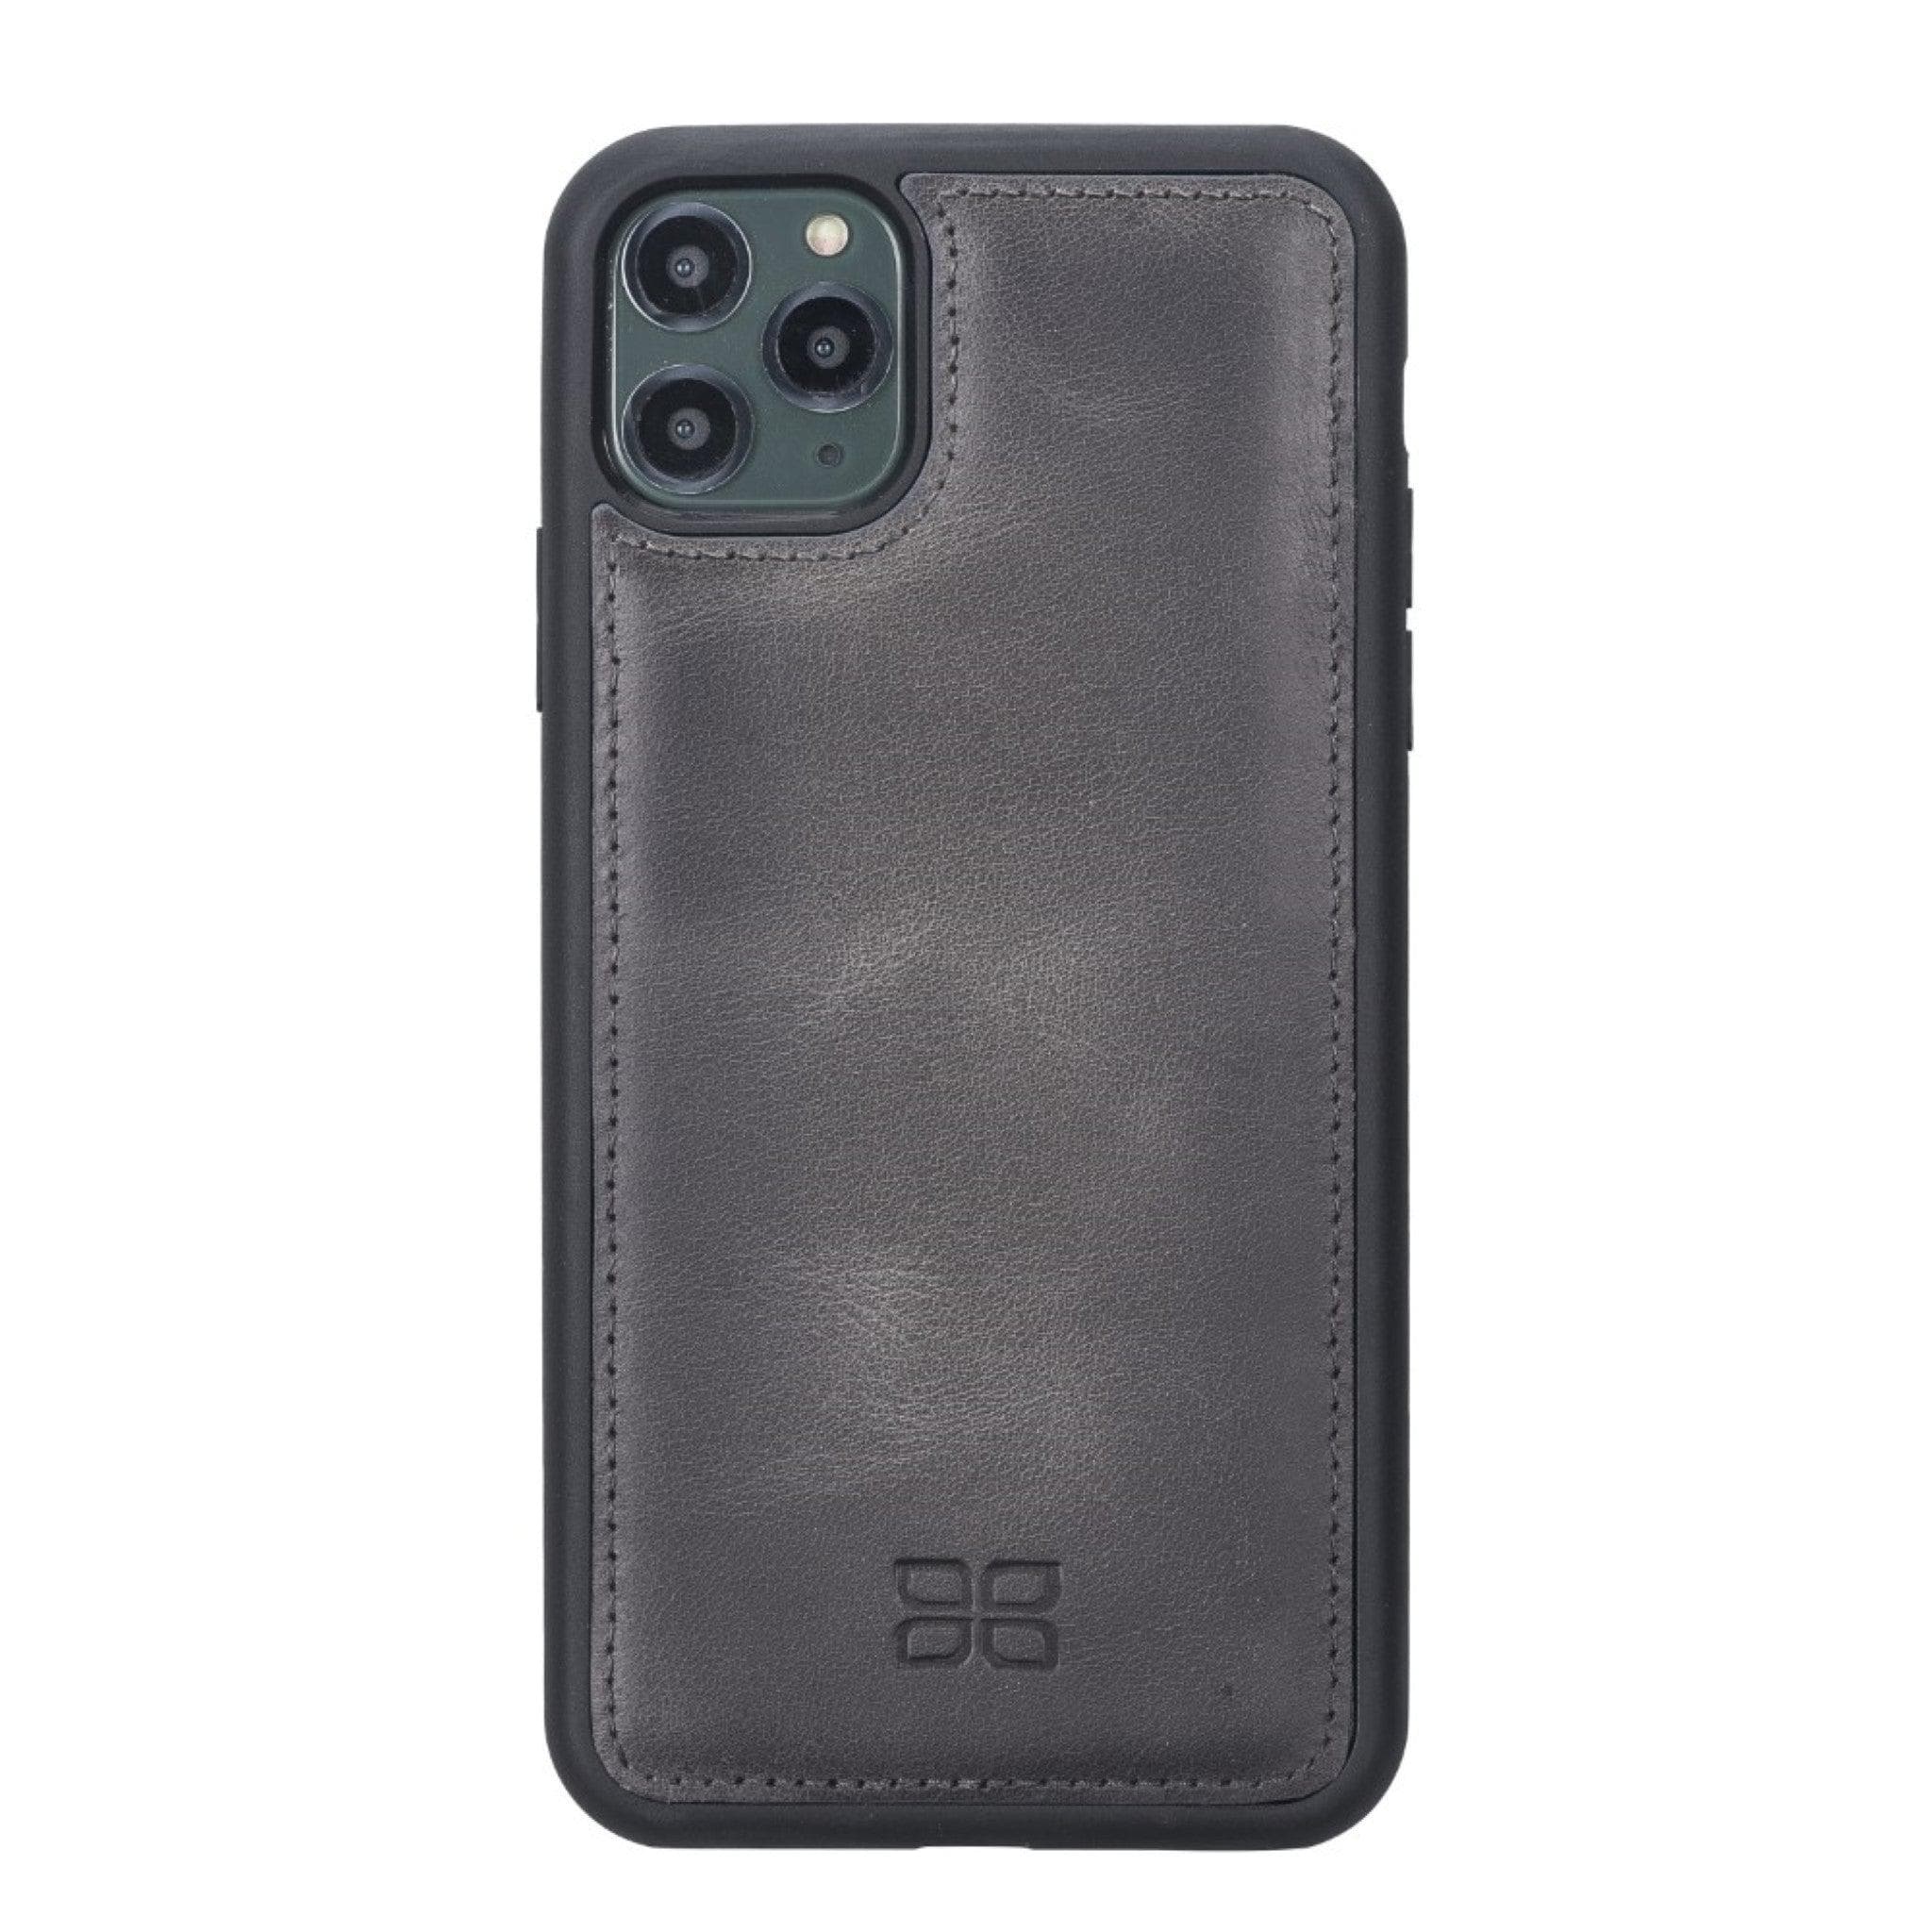 Flex Cover Leather Back Cover Case for Apple iPhone 11 Series iPhone 11 Pro Max / Tiguan Gray Bouletta LTD